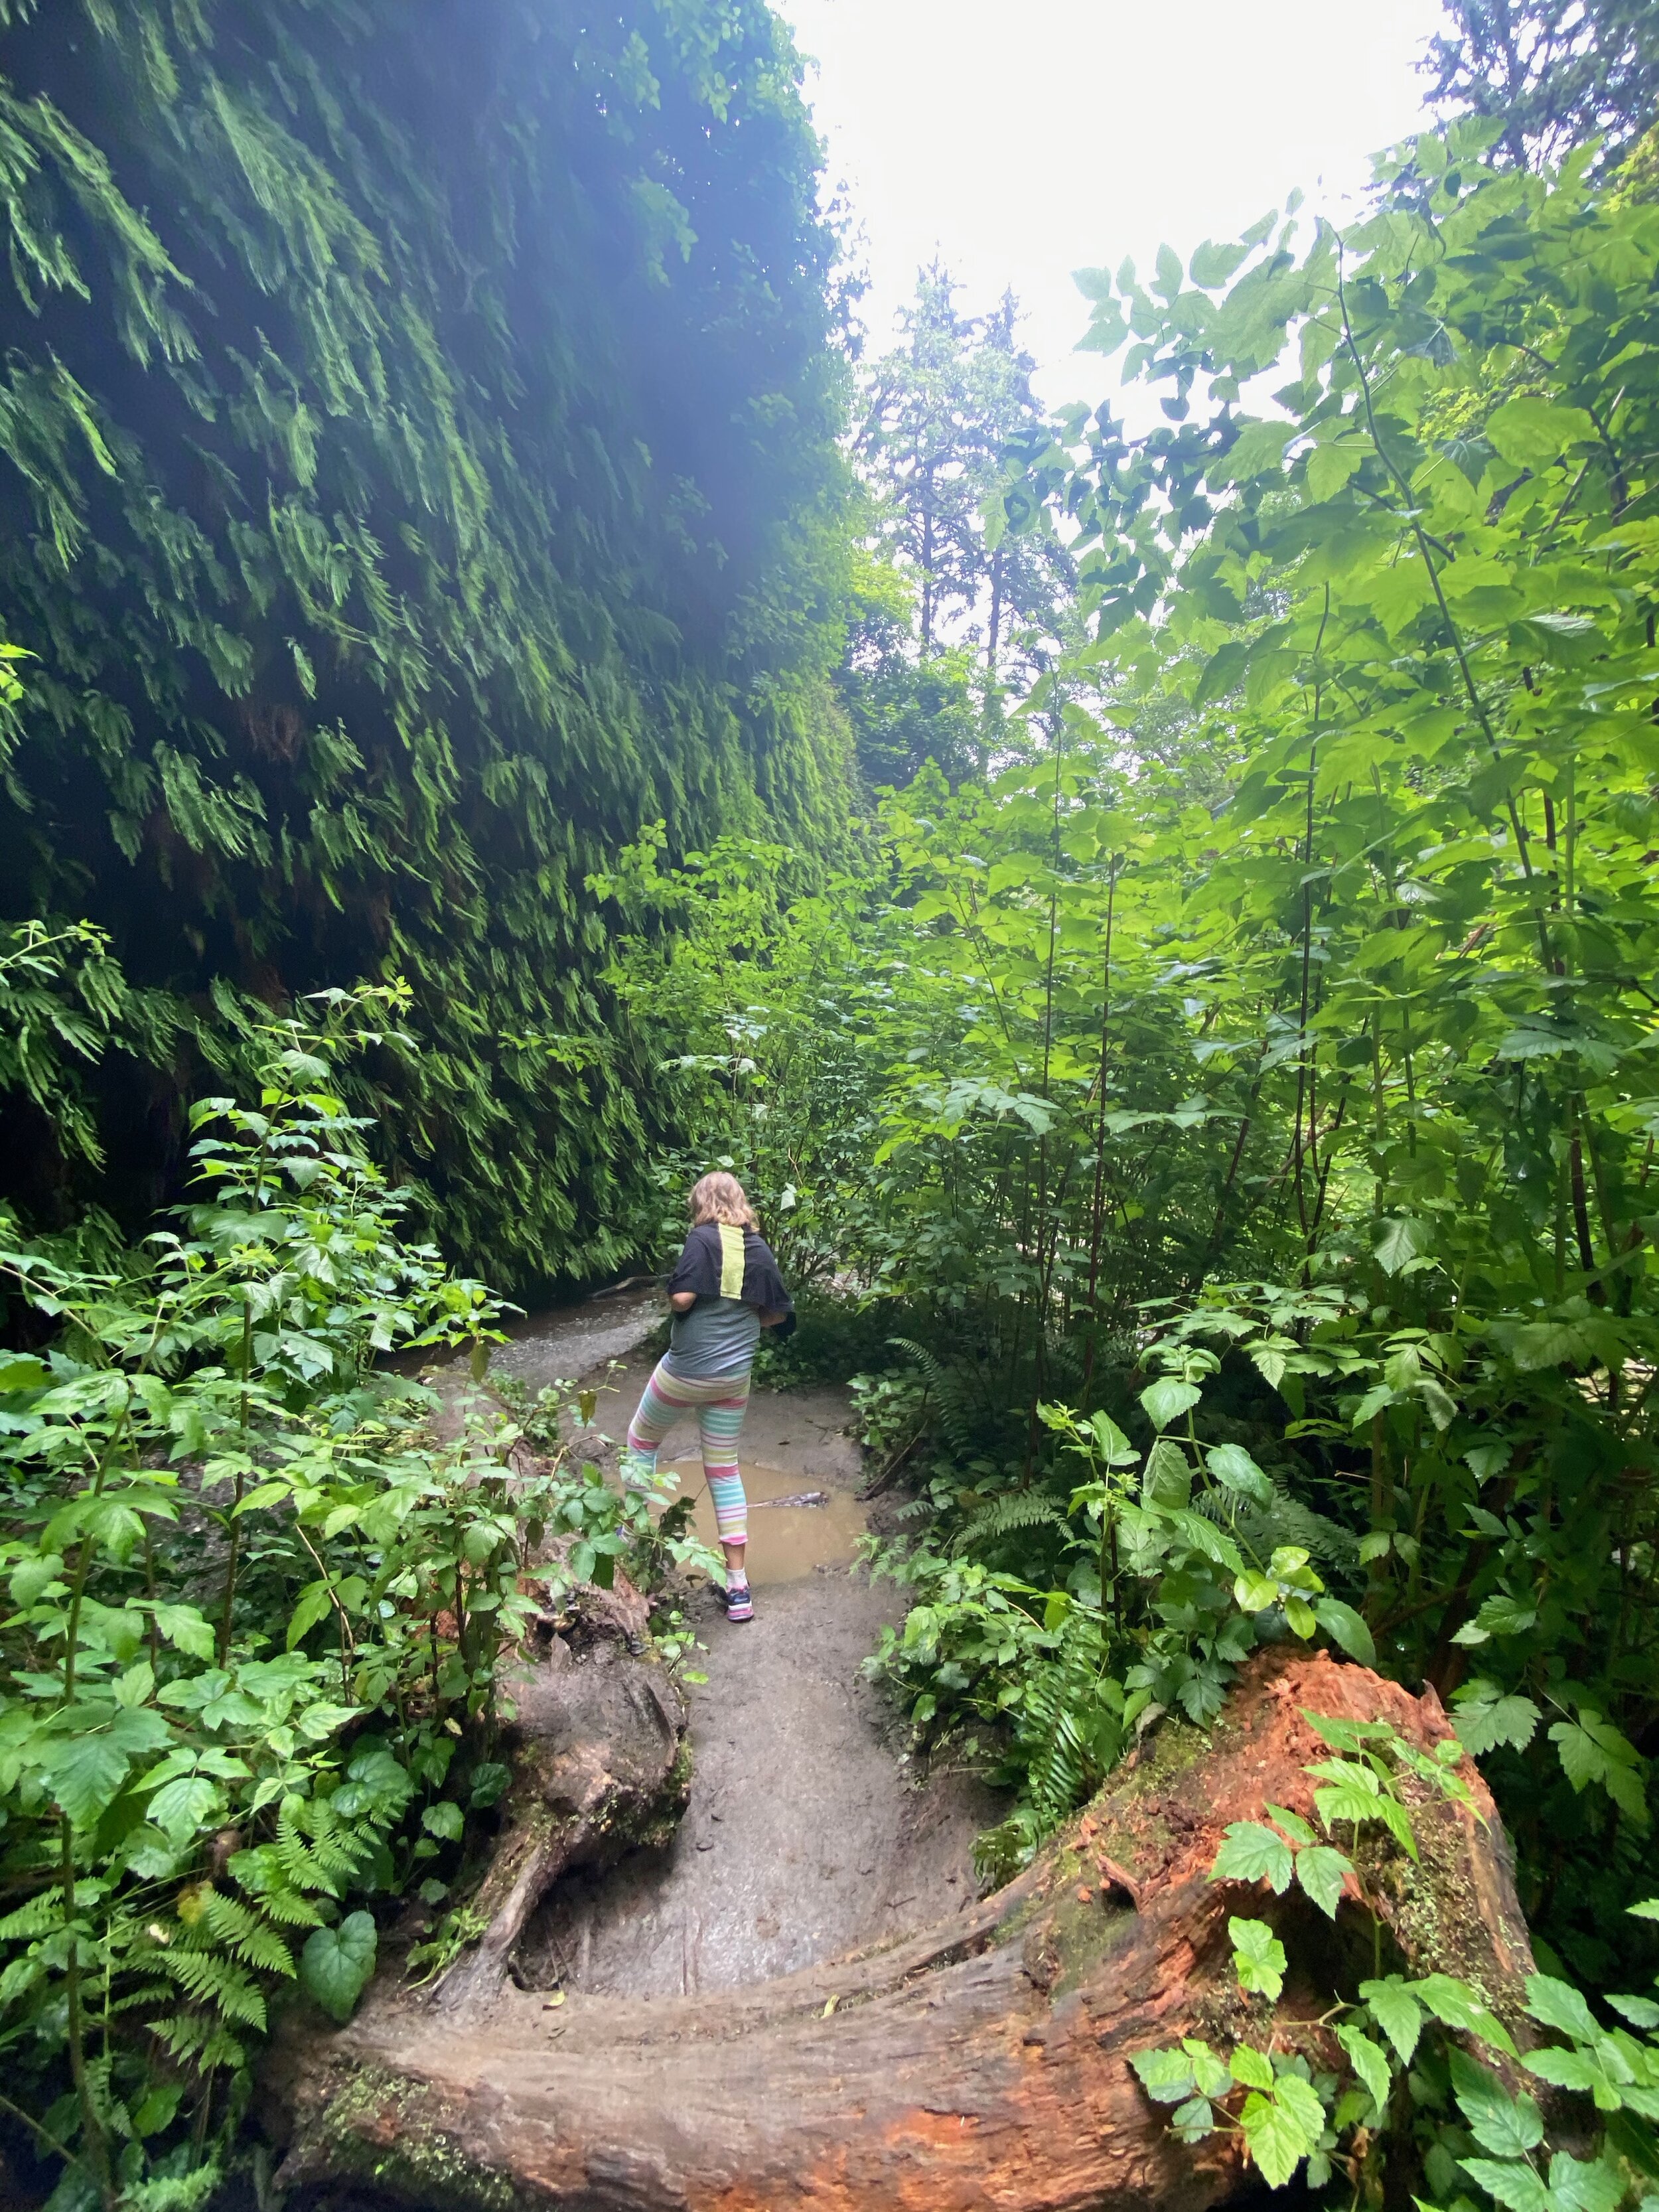 Bunny loves leading the way on our hikes, especially when the path isn’t fully defined, like here in Fern Canyon.  Photo by Karen Boudreaux, June 12, 2021